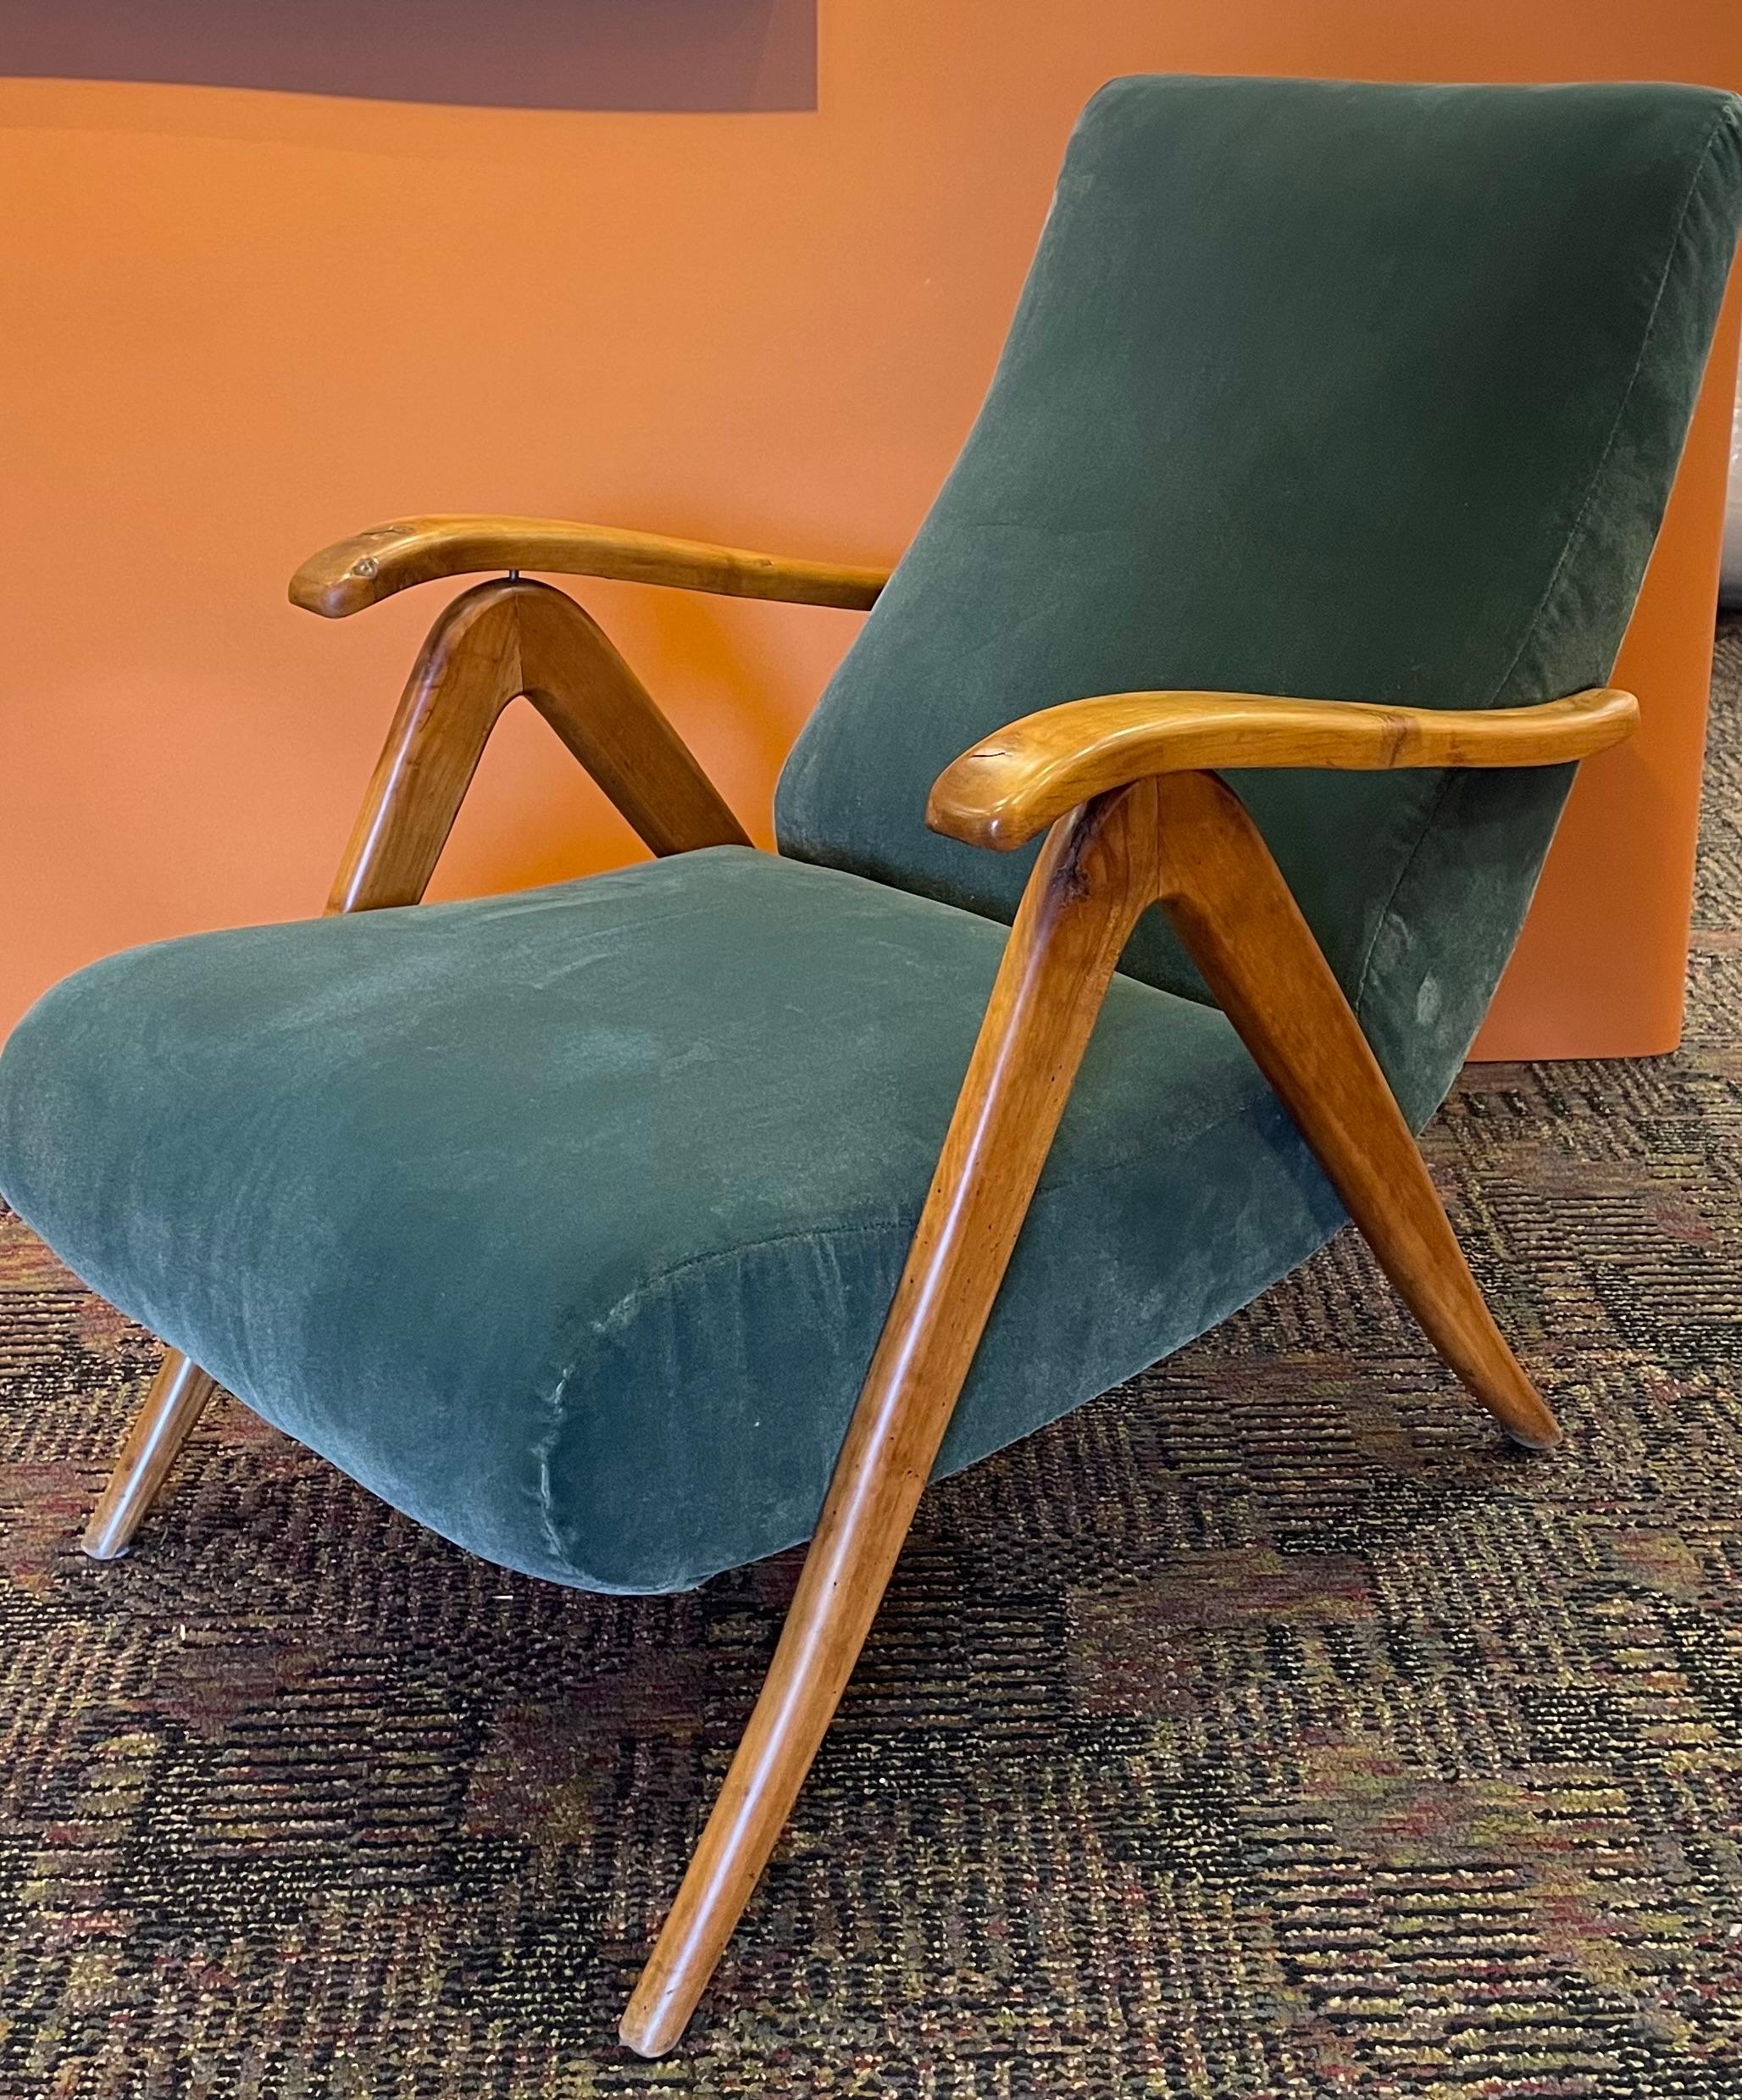 The allure of the Italian design of the 1940s is immediately evident in this two position reclining armchair. Once I gave it a sit I did not want to ever move.  It's a must-have for the person who has taken the art of relaxing to new heights.